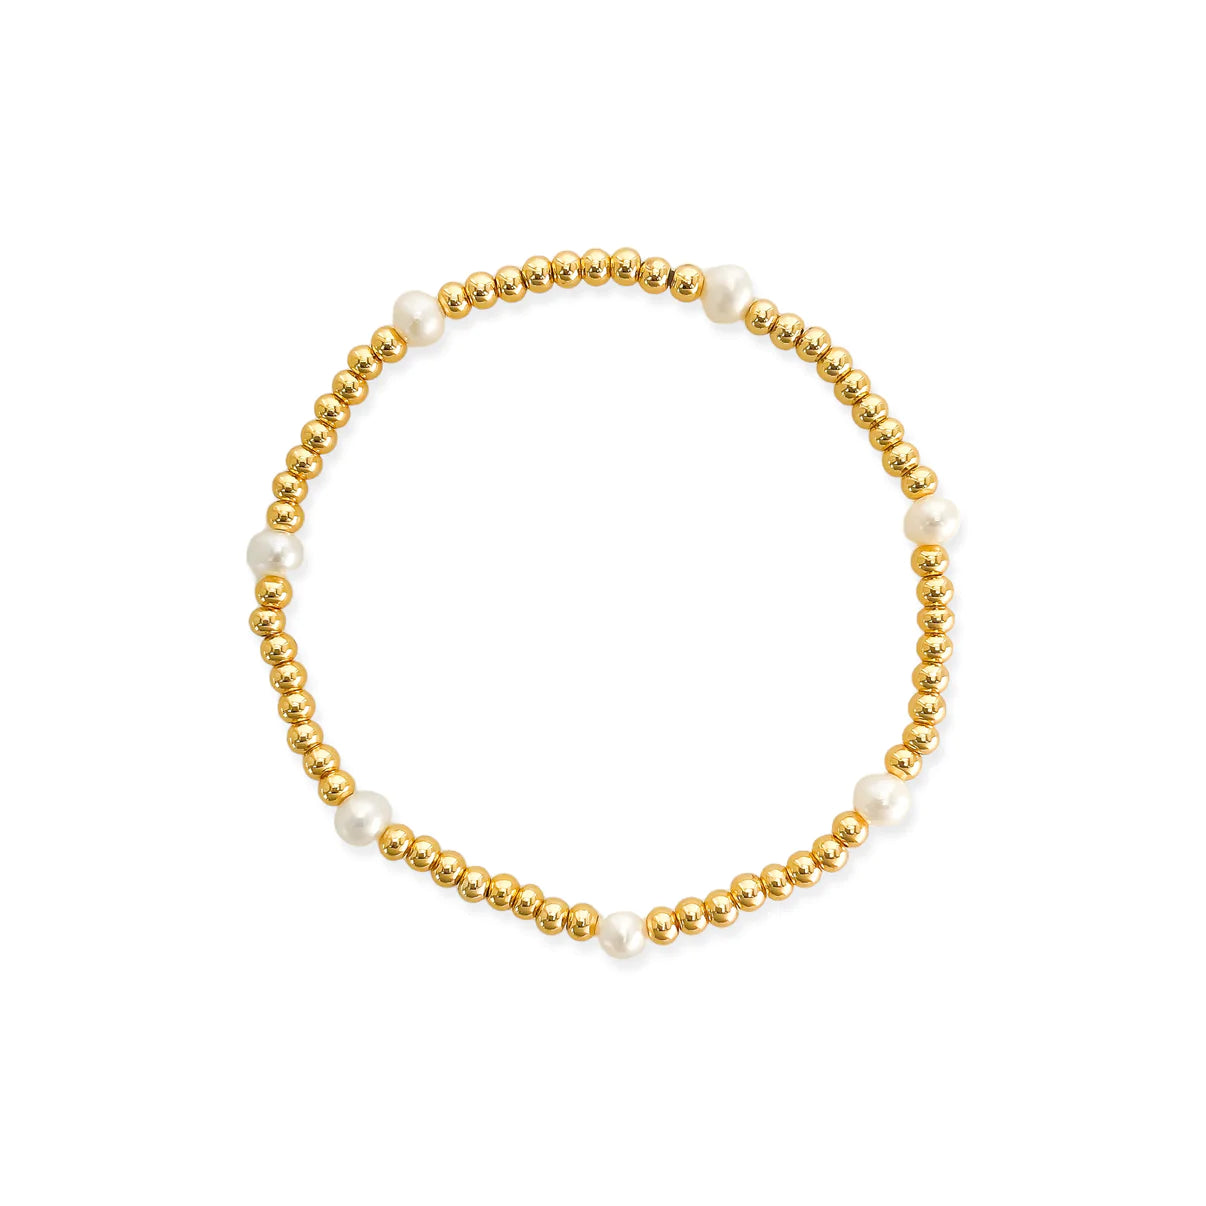 Pearl and Gold Beaded Stretch Bracelet